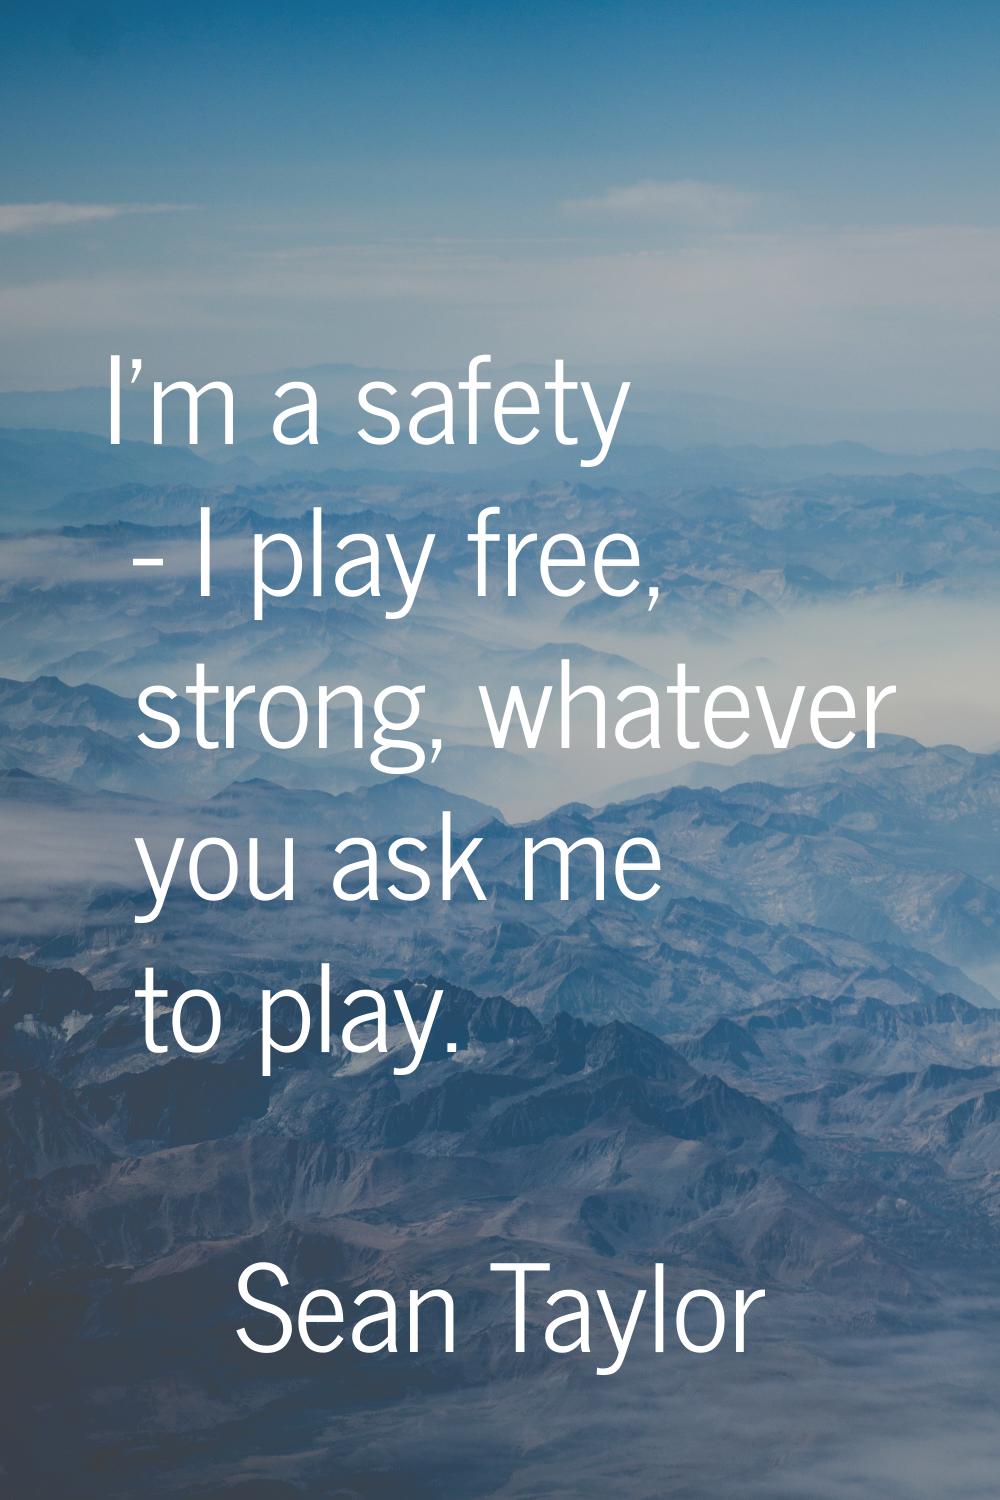 I'm a safety - I play free, strong, whatever you ask me to play.